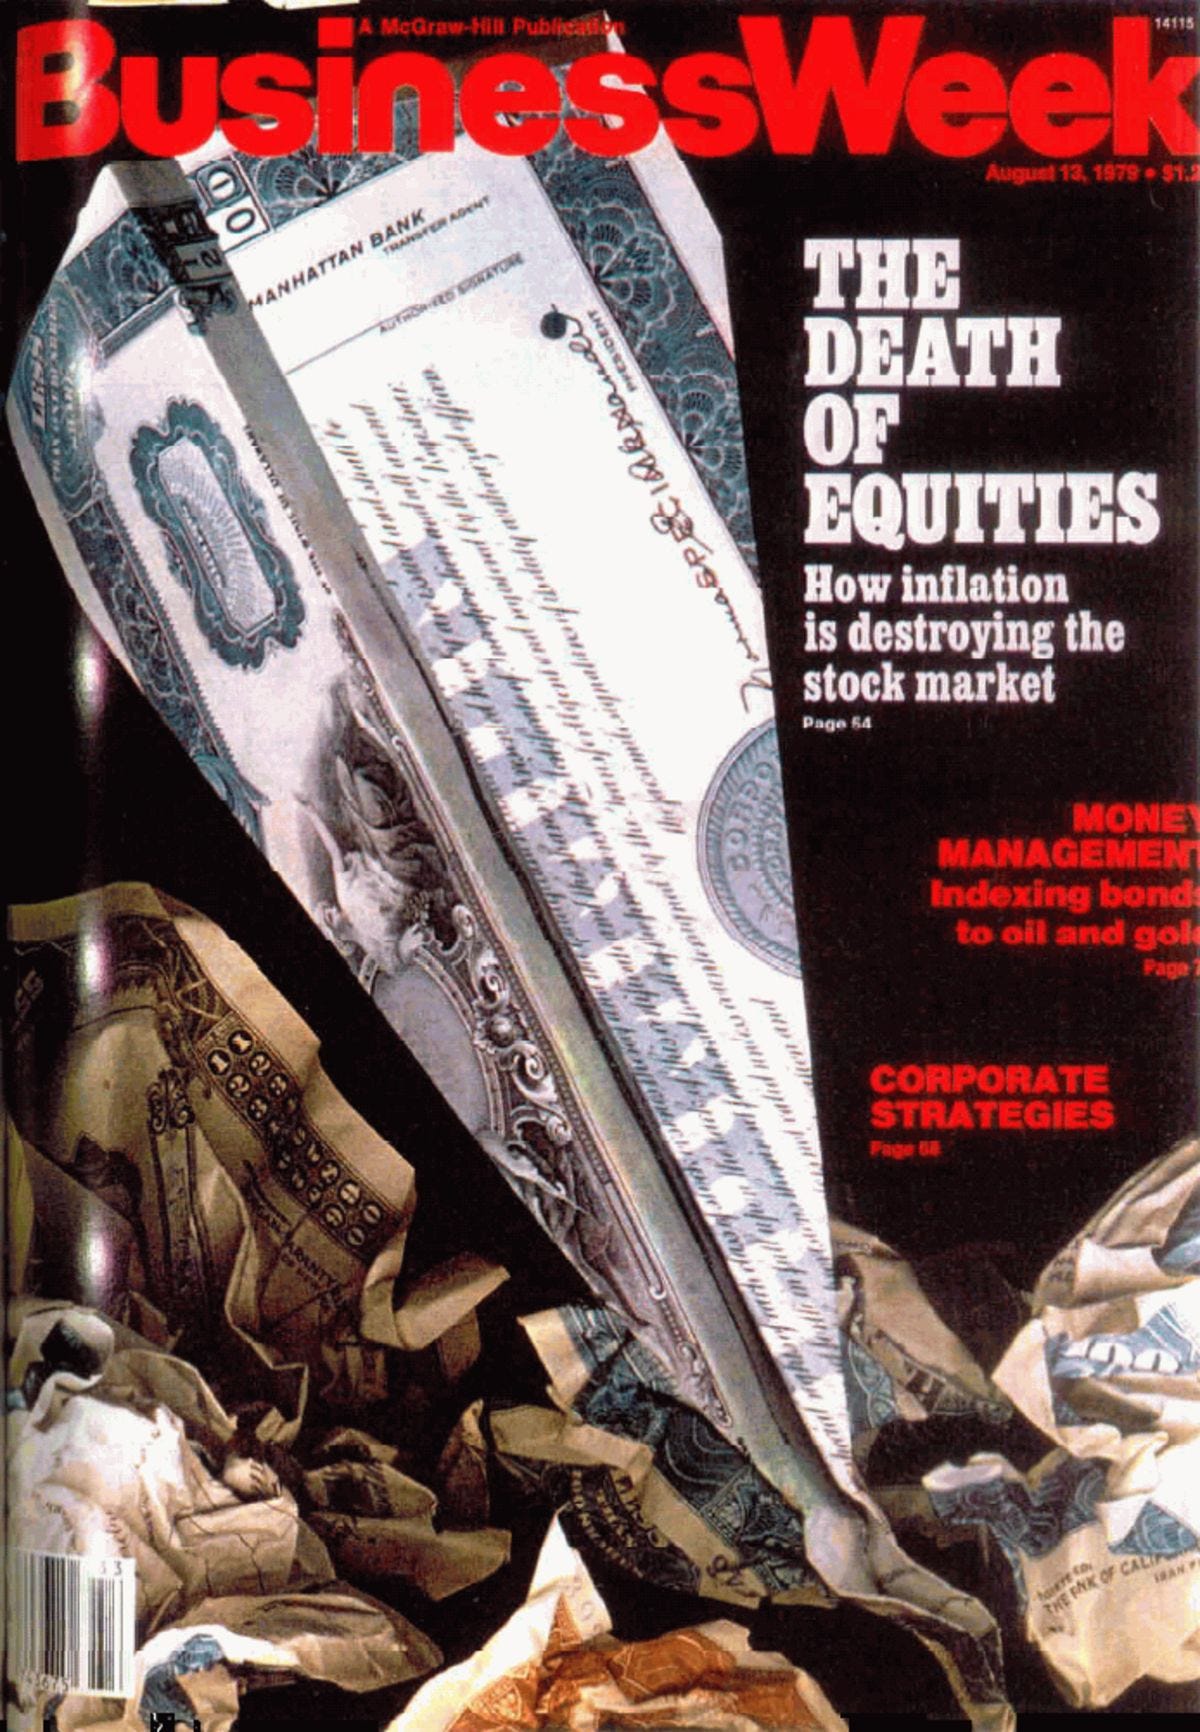 It's Been 40 Years Since Our Cover Story Declared 'The Death of Equities' -  Bloomberg